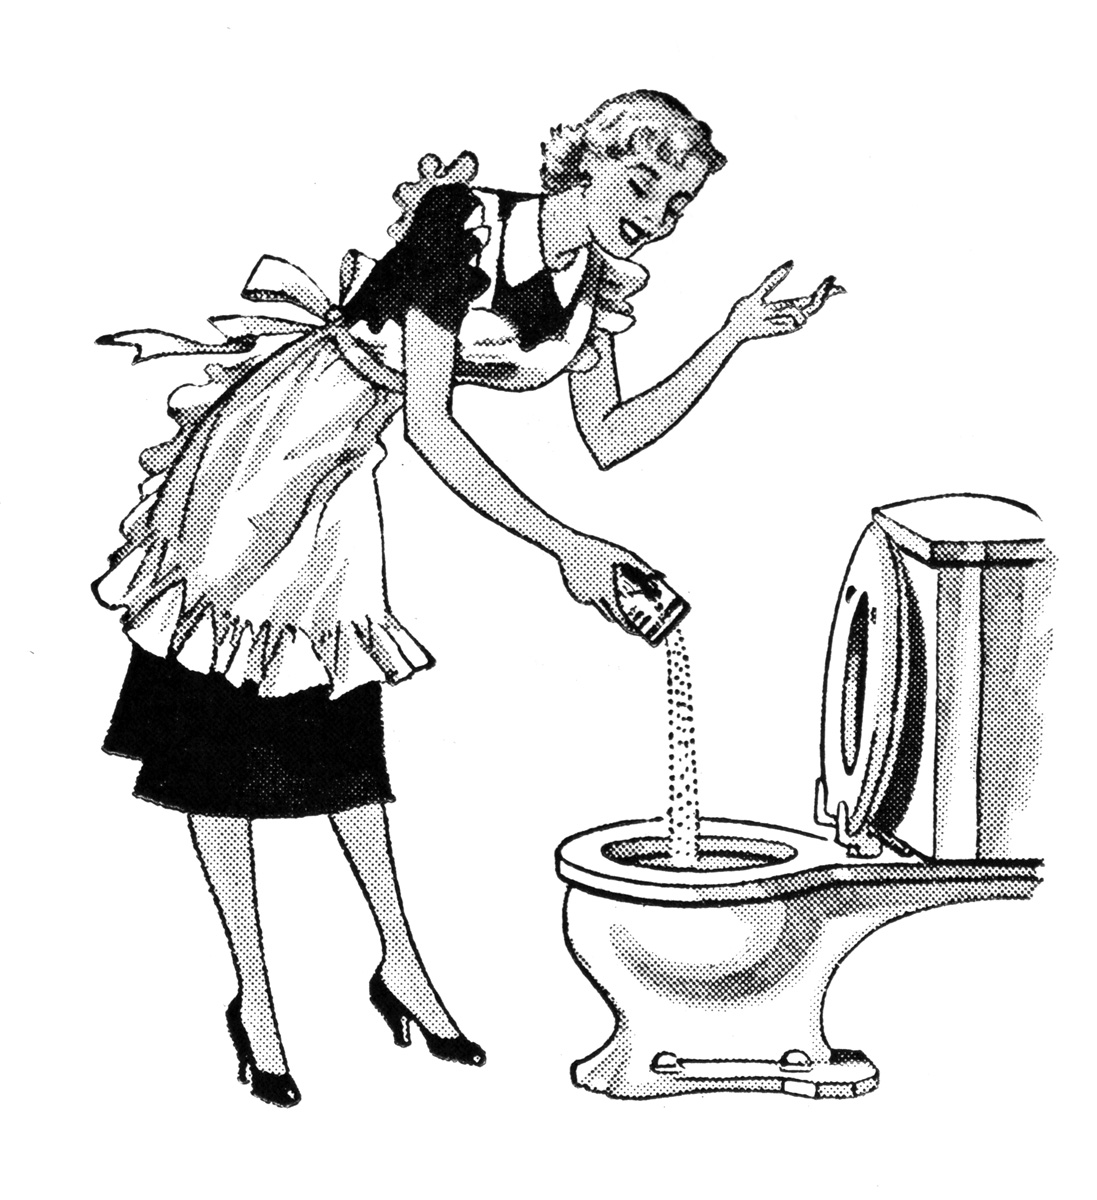 First up, this lady looks to be pouring some drain-clearing powder into her toilet, but she could just as easily be getting rid of her stash because The ...